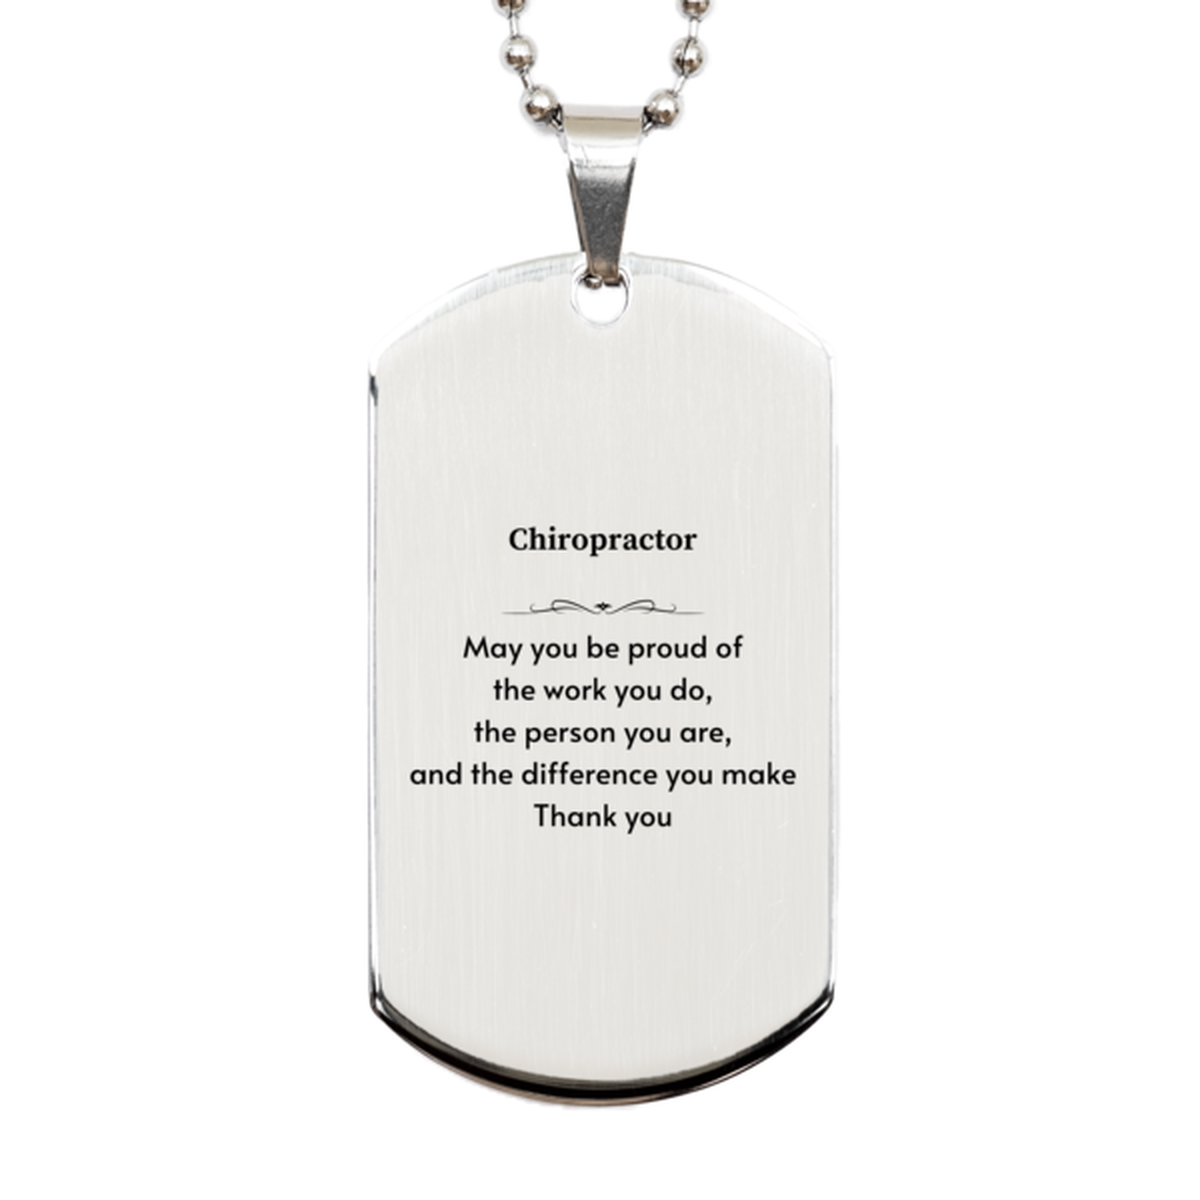 Heartwarming Silver Dog Tag Retirement Coworkers Gifts for Chiropractor, Chiropractor May You be proud of the work you do, the person you are Gifts for Boss Men Women Friends